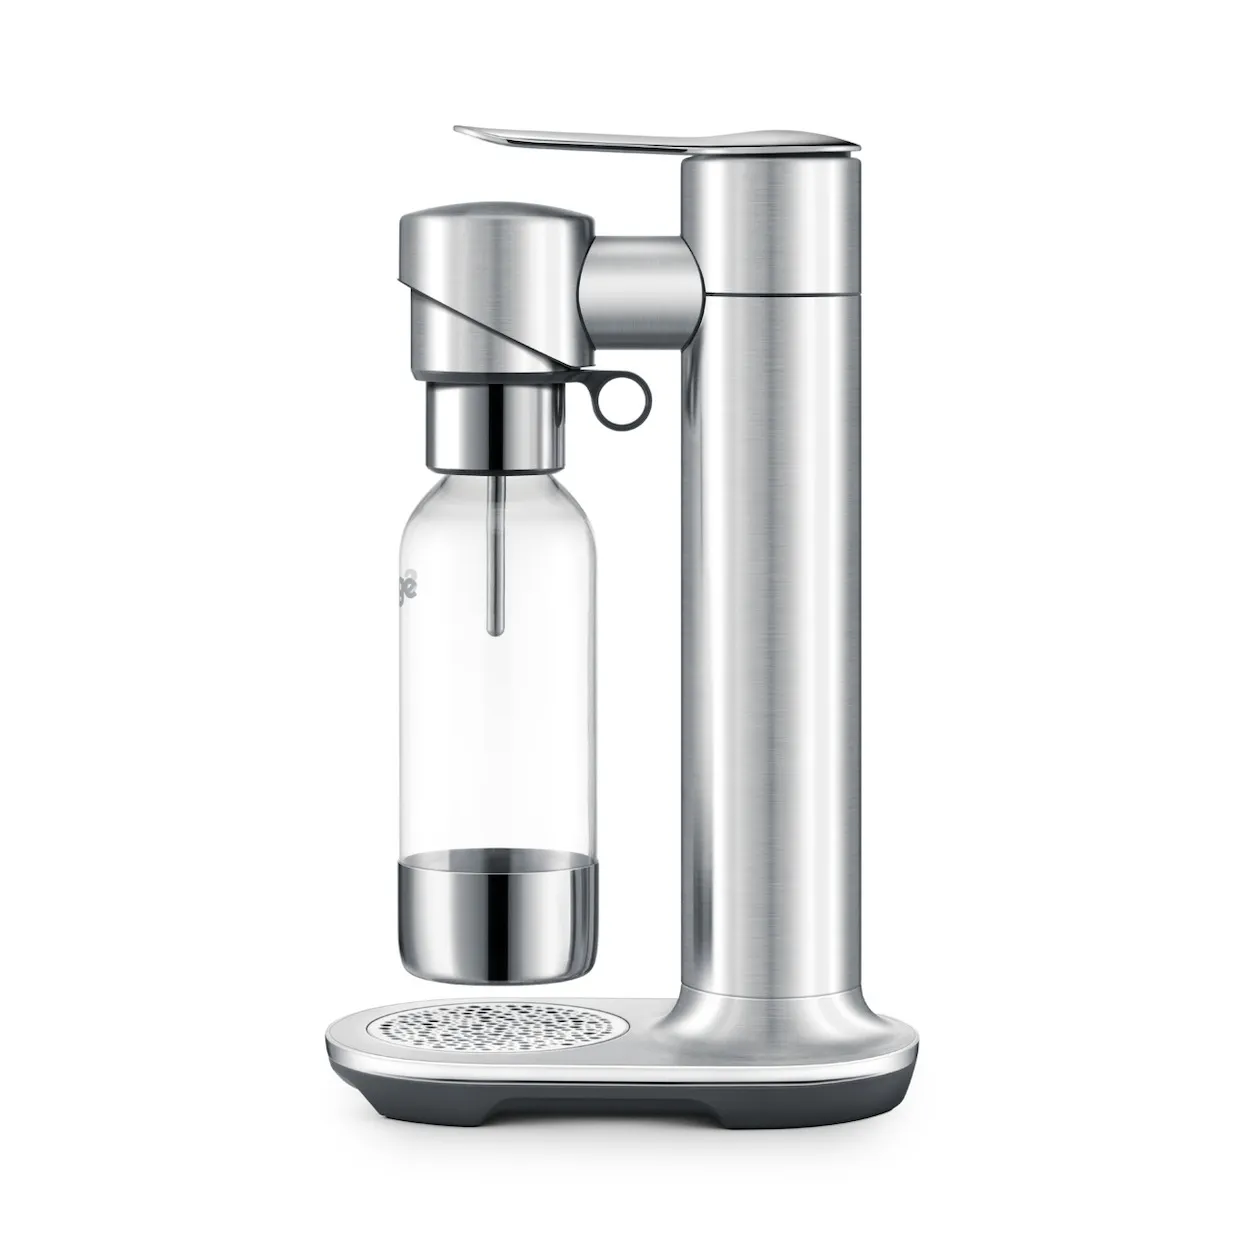 Sage THE INFIZZ FUSION STAINLESS STEEL